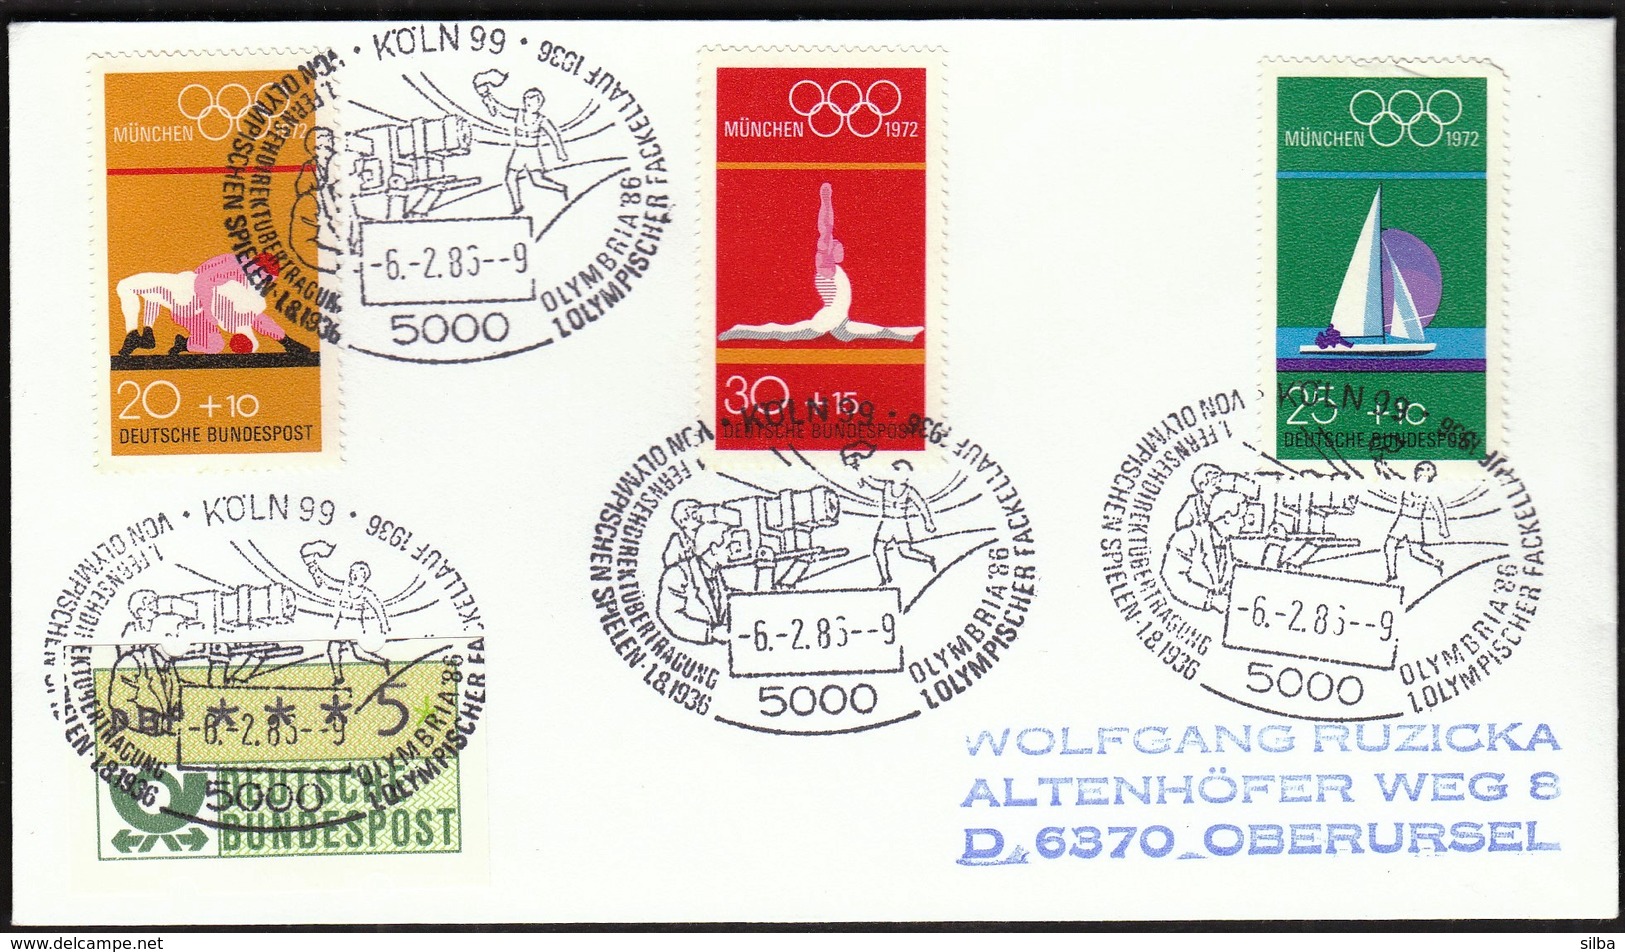 Germany Koln 1986 / 50 Years Of Olympic Games Flame Berlin / Torch / 1st Television Transmission / OLYMBRIA '86 - Estate 1936: Berlino